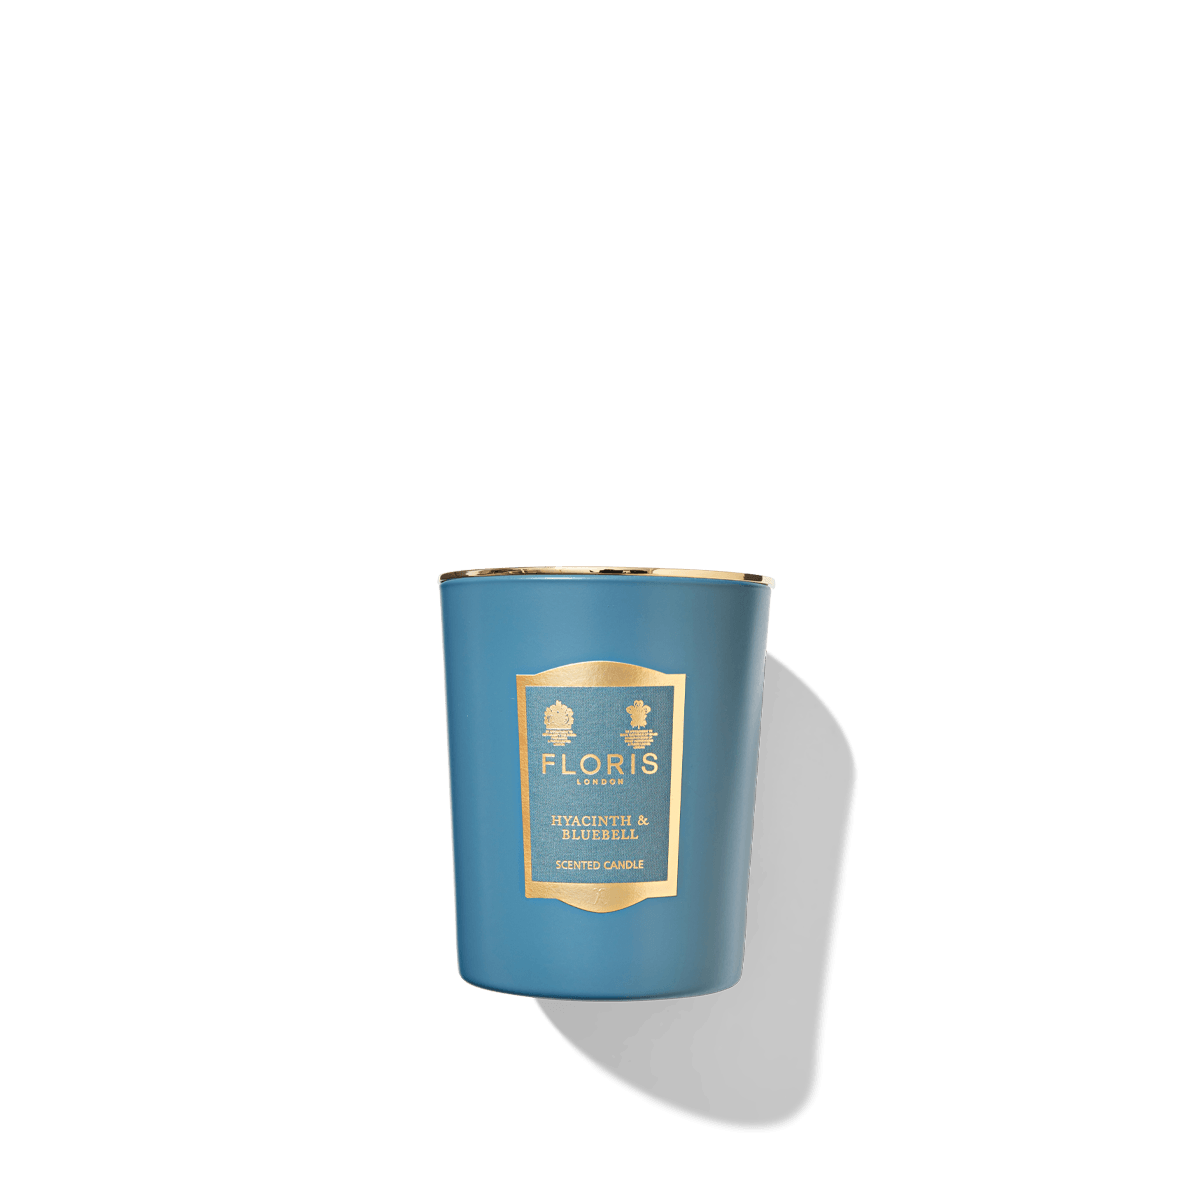 Sky blue candle with gold lid and blue label for the hyacinth and bluebell Floris london scented candle.